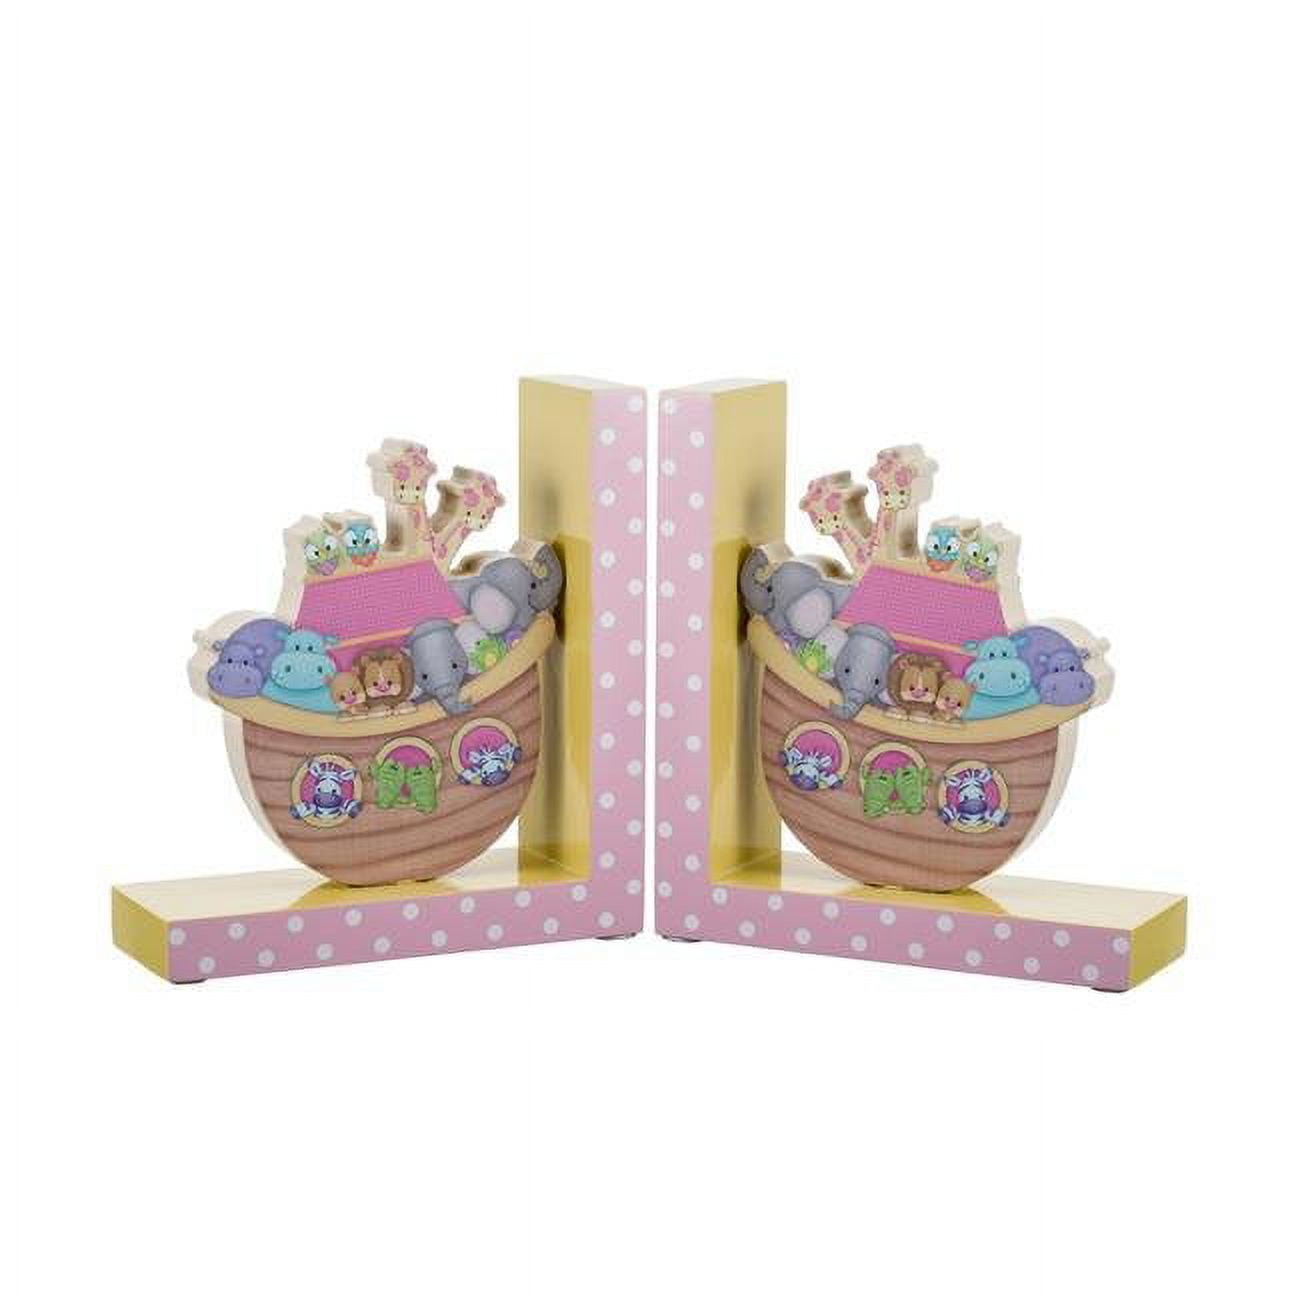 Picture of Borders Unlimited 90010 Noahs Pastel Pairs the Ark Bookends